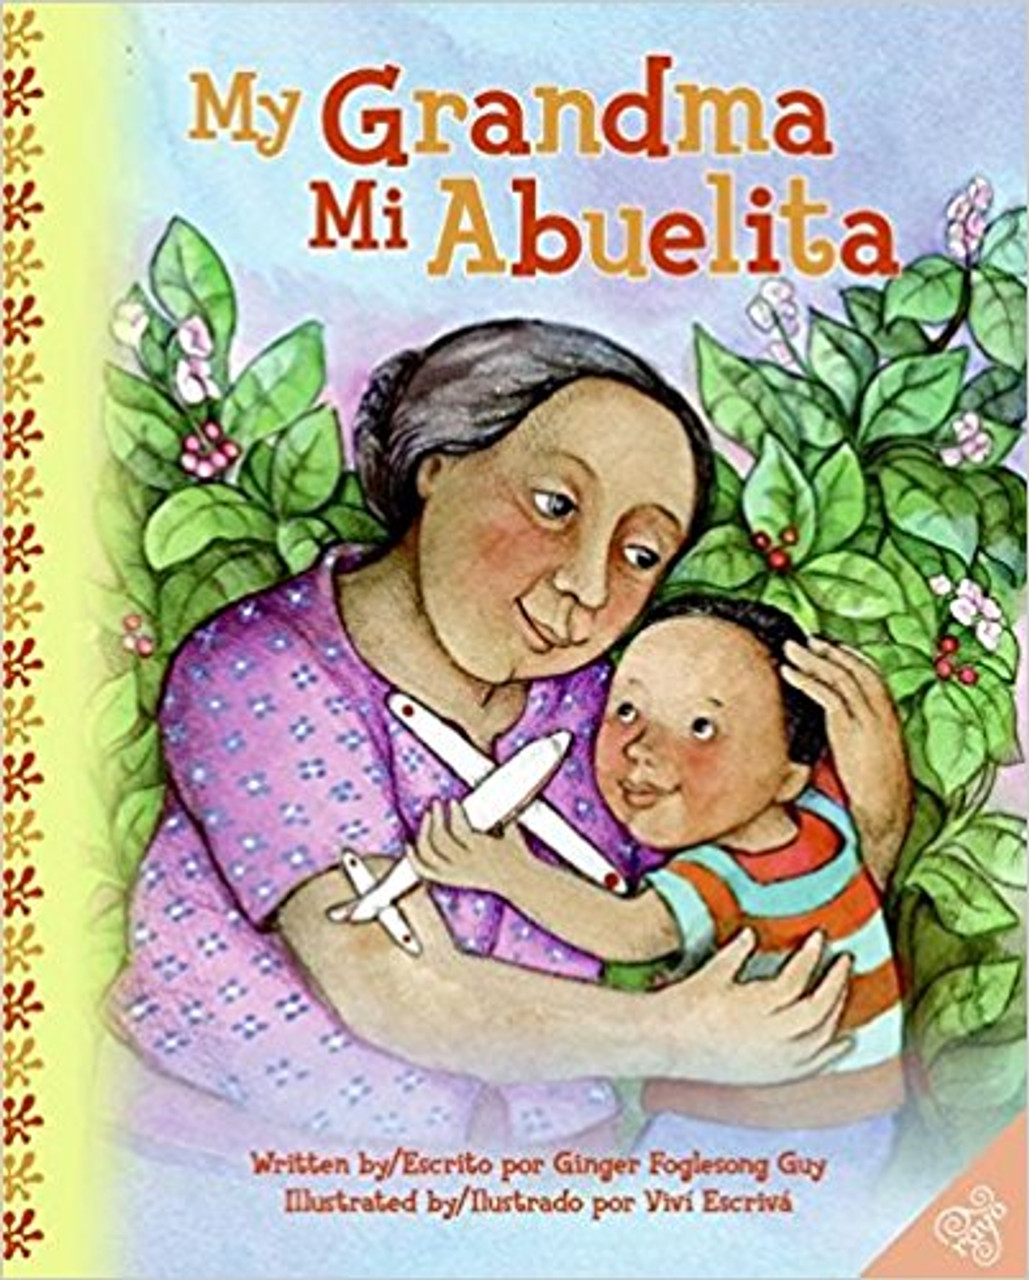 A young boy and his family travel by air, over ocean, and through the countryside to visit his grandma. Written in both English and Spanish, the text is brought to life by Escriva's watercolor paintings.